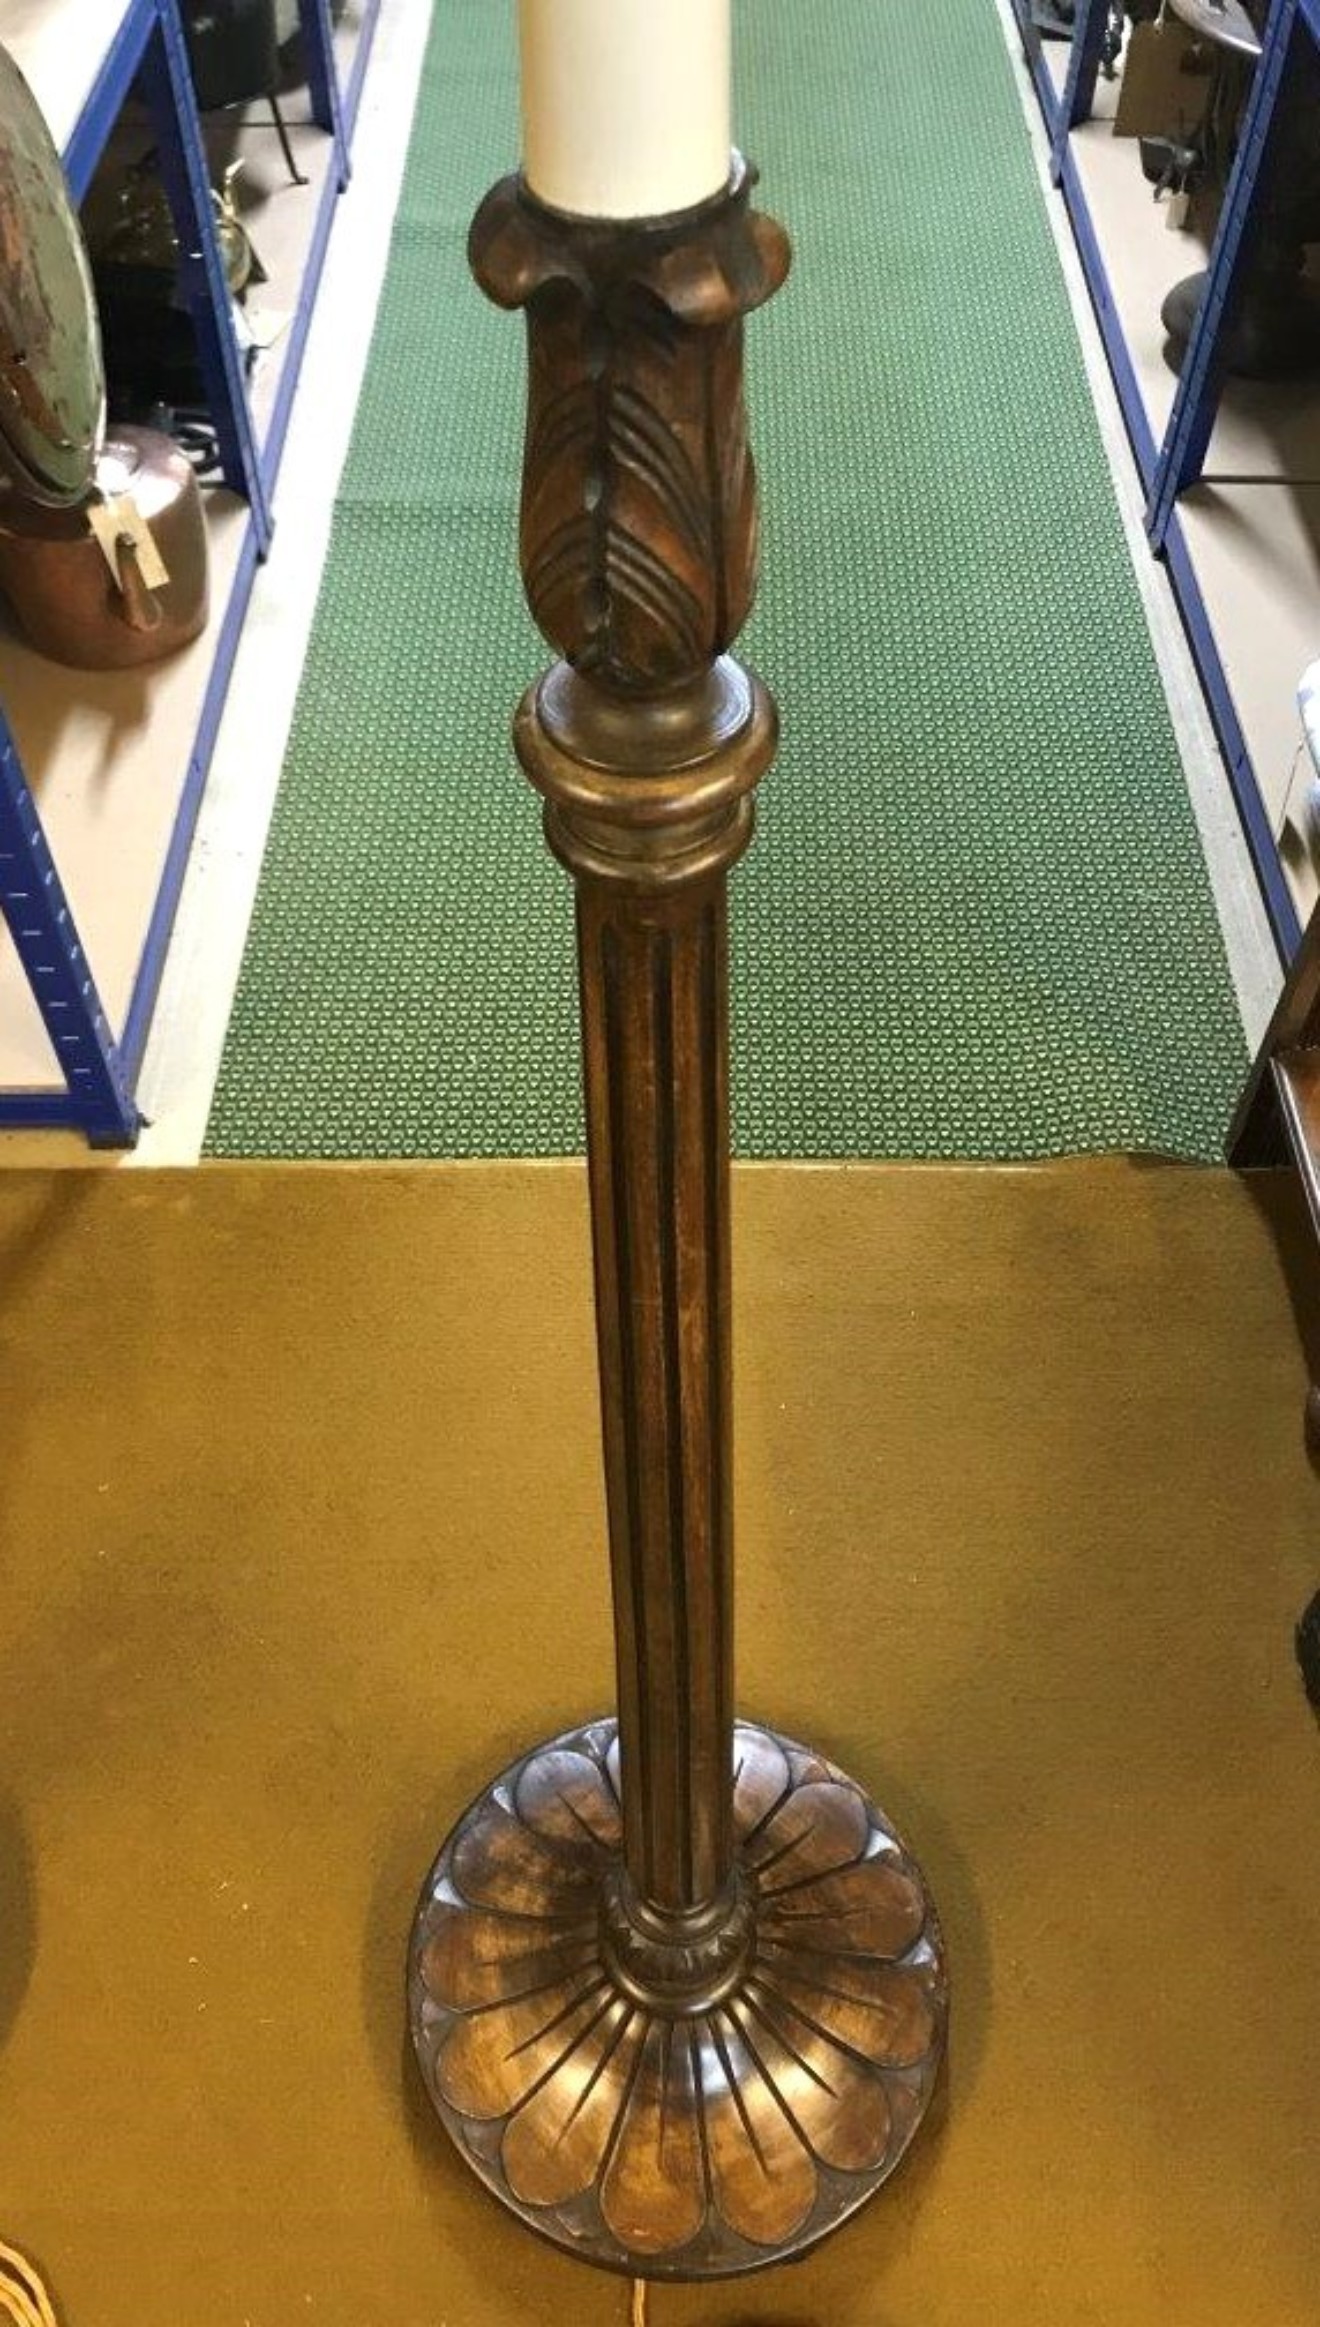 Vintage Pair of Carved Mahogany Standard Lamps c/w Shades